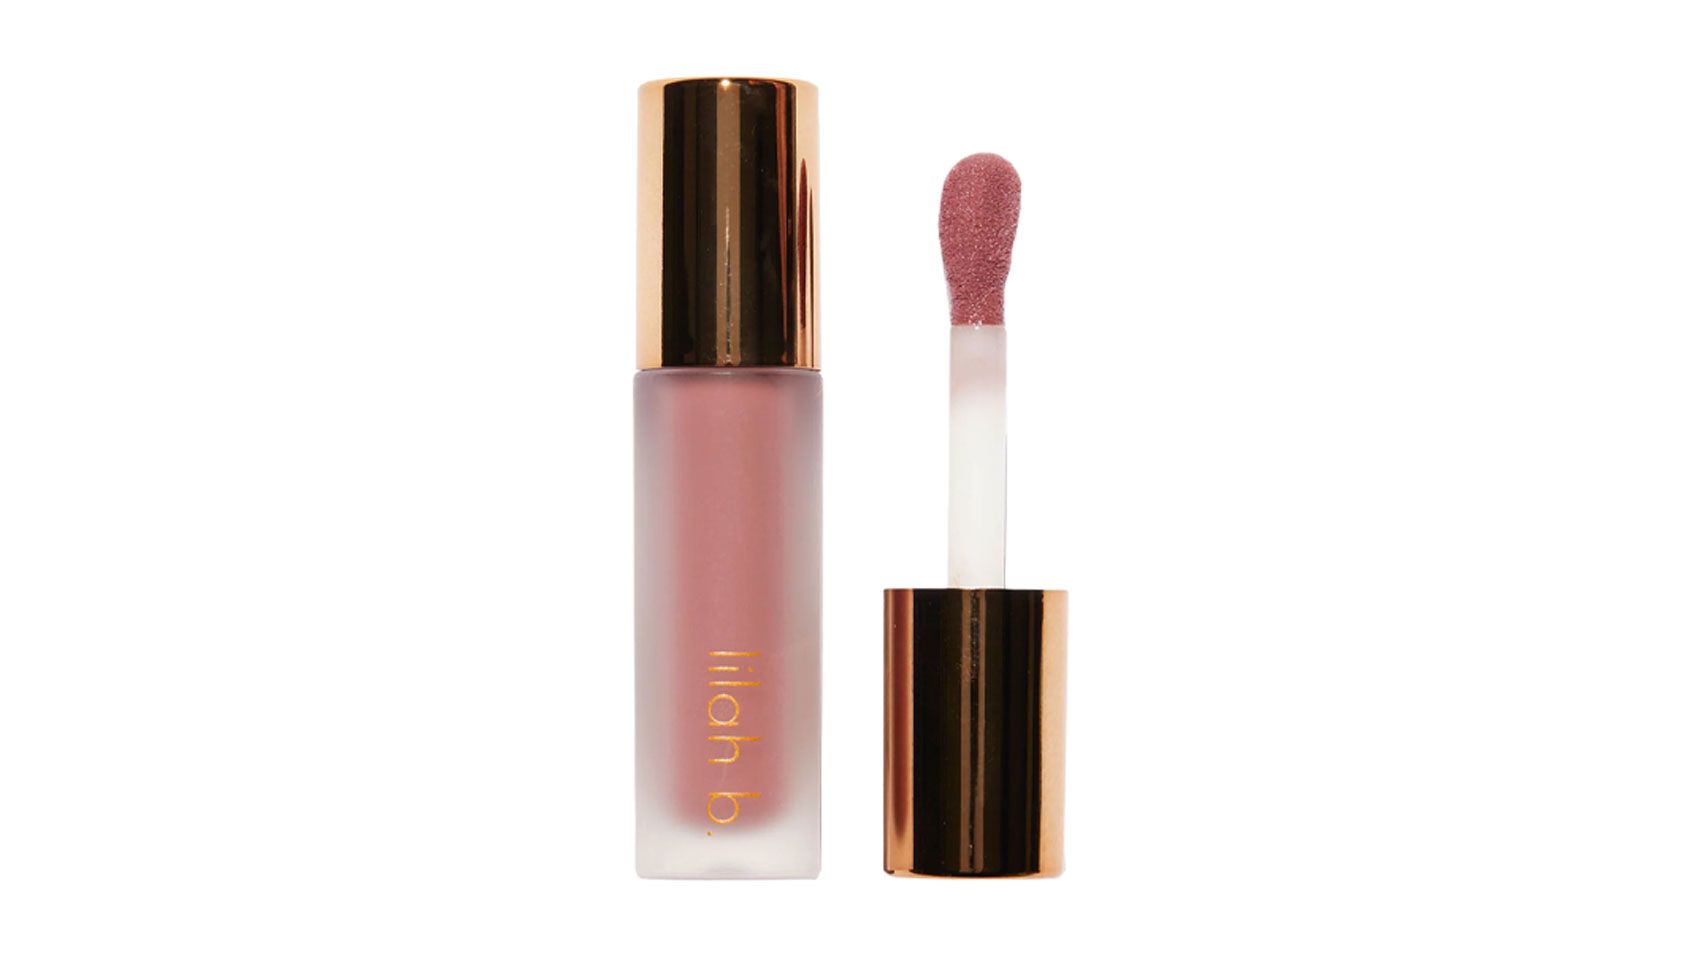 FLOATING IN DREAMS - Reviews . Makeup . Fashion . everyday beauty made  sense. Dior Lip Glow lip oil review